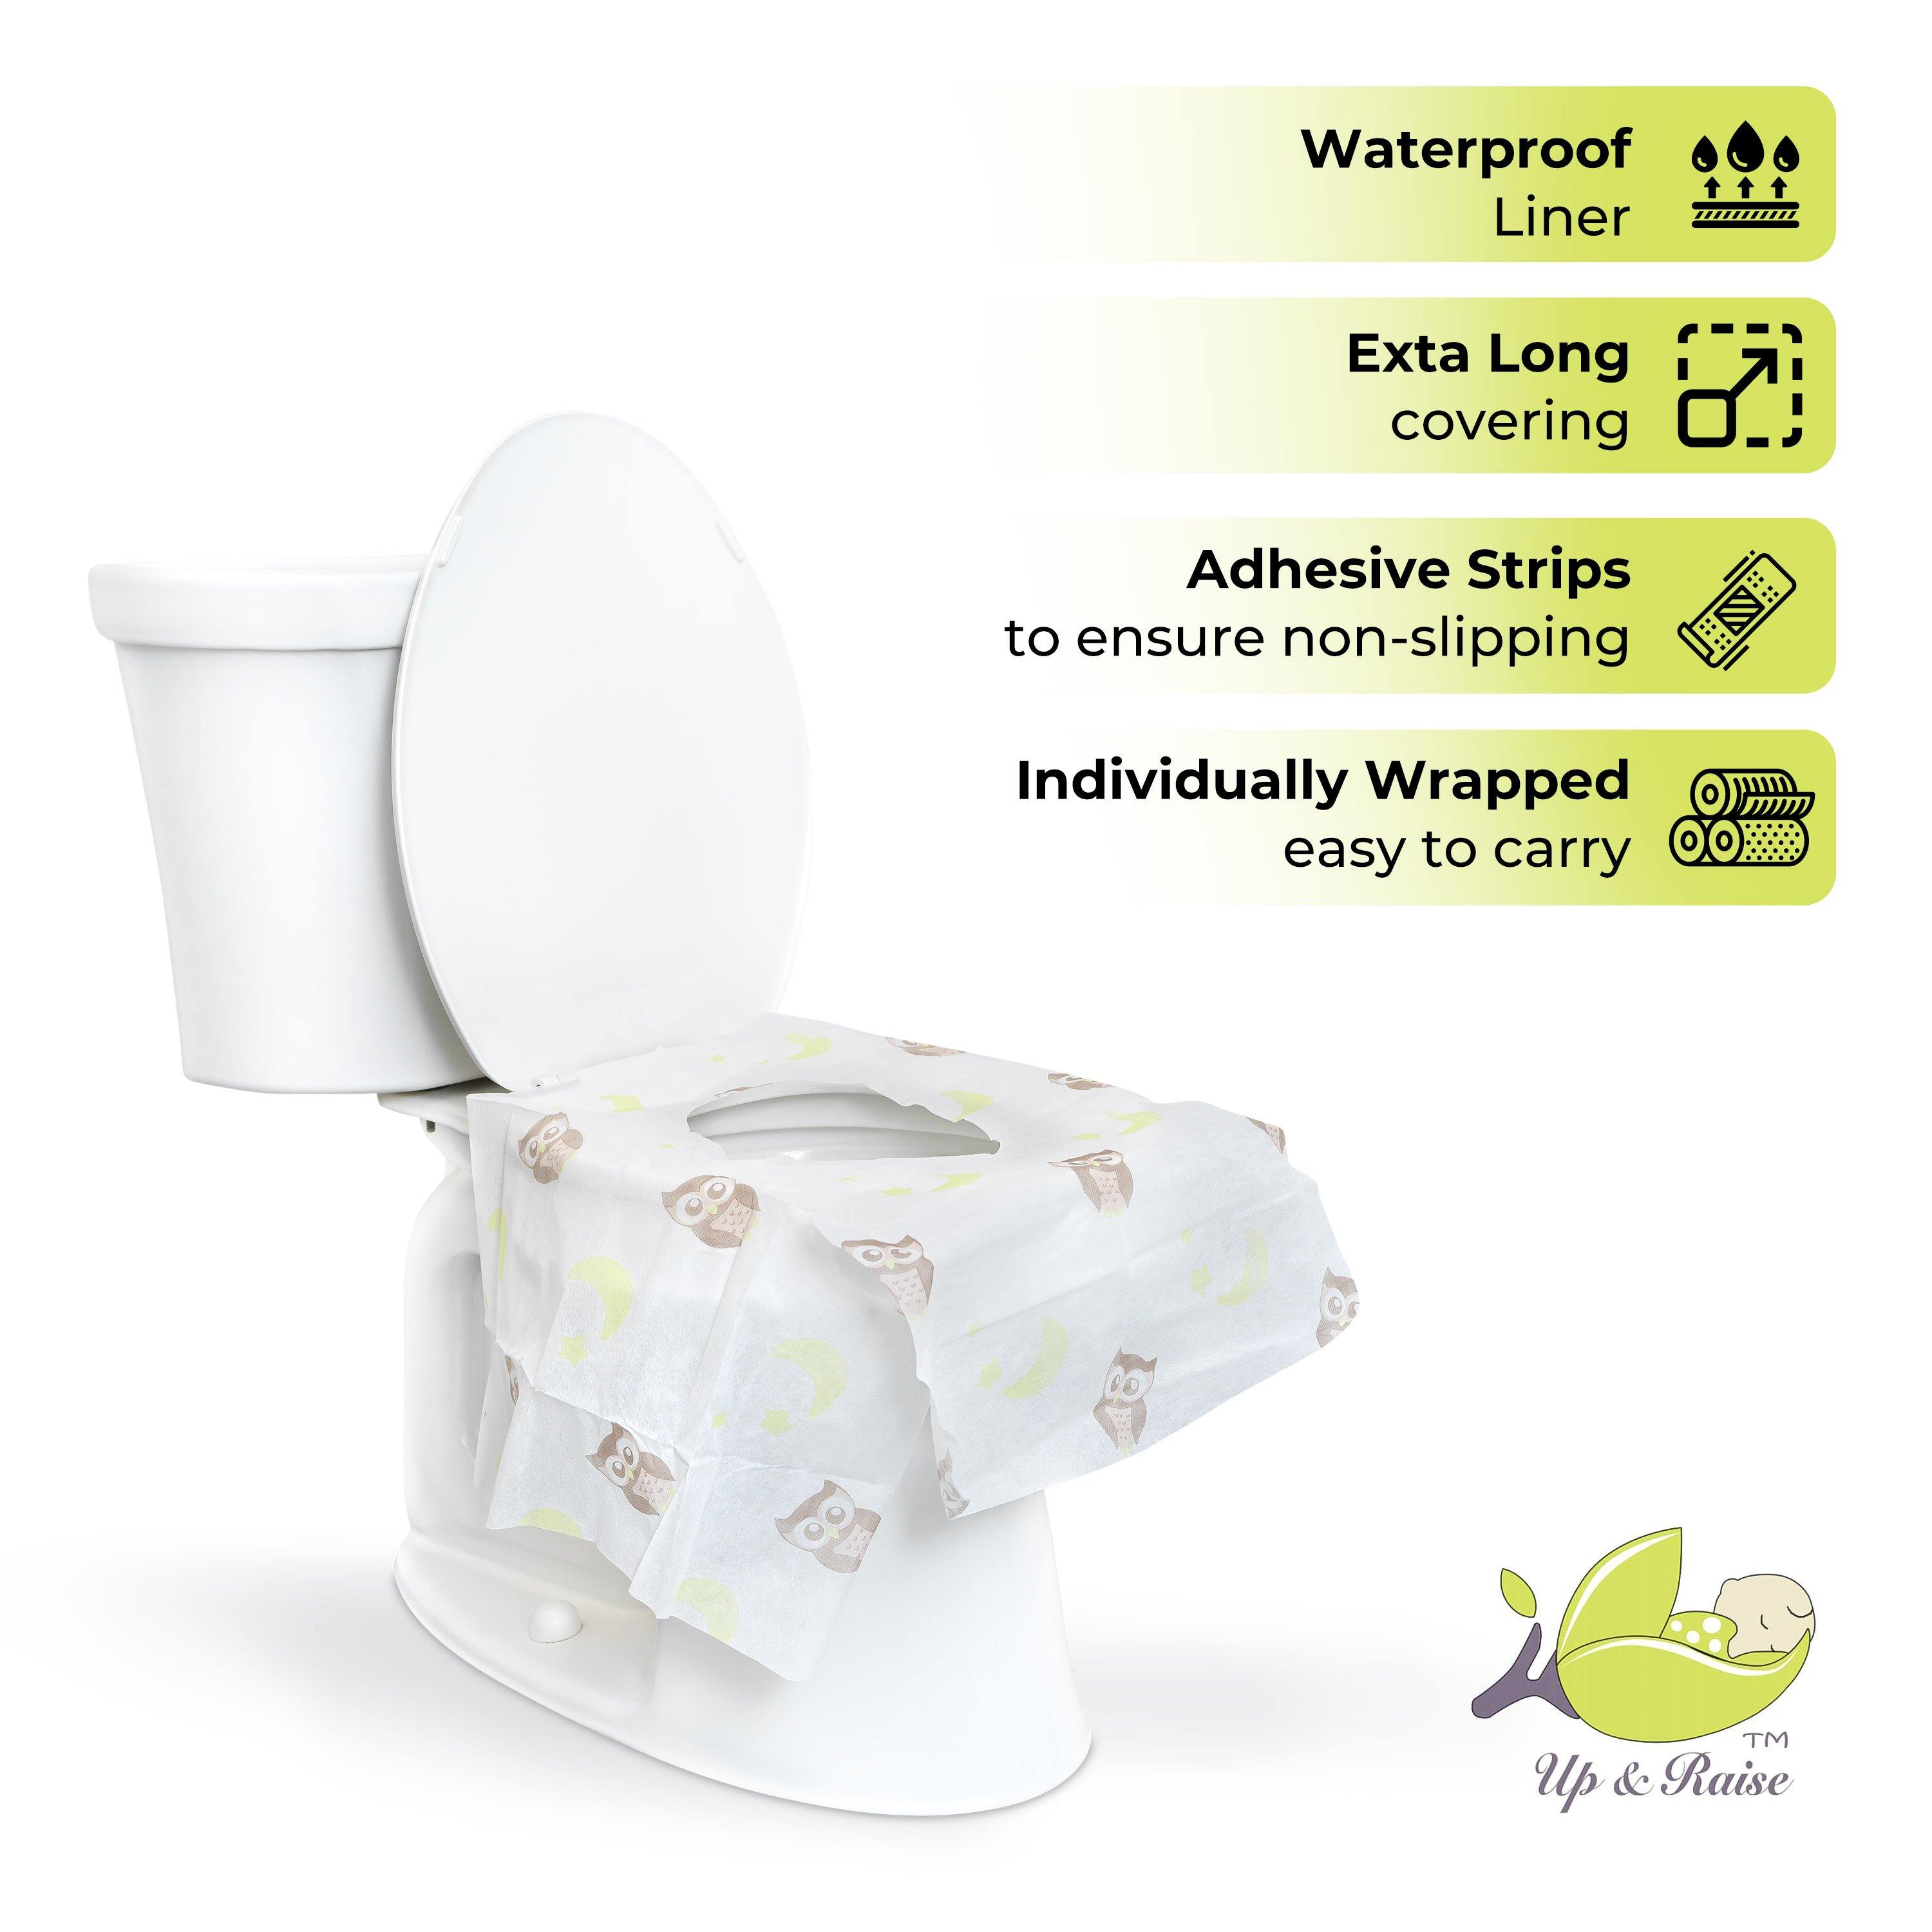 ABS Toilet Seat Lock For Inquisitive Toddlers - Inspire Uplift